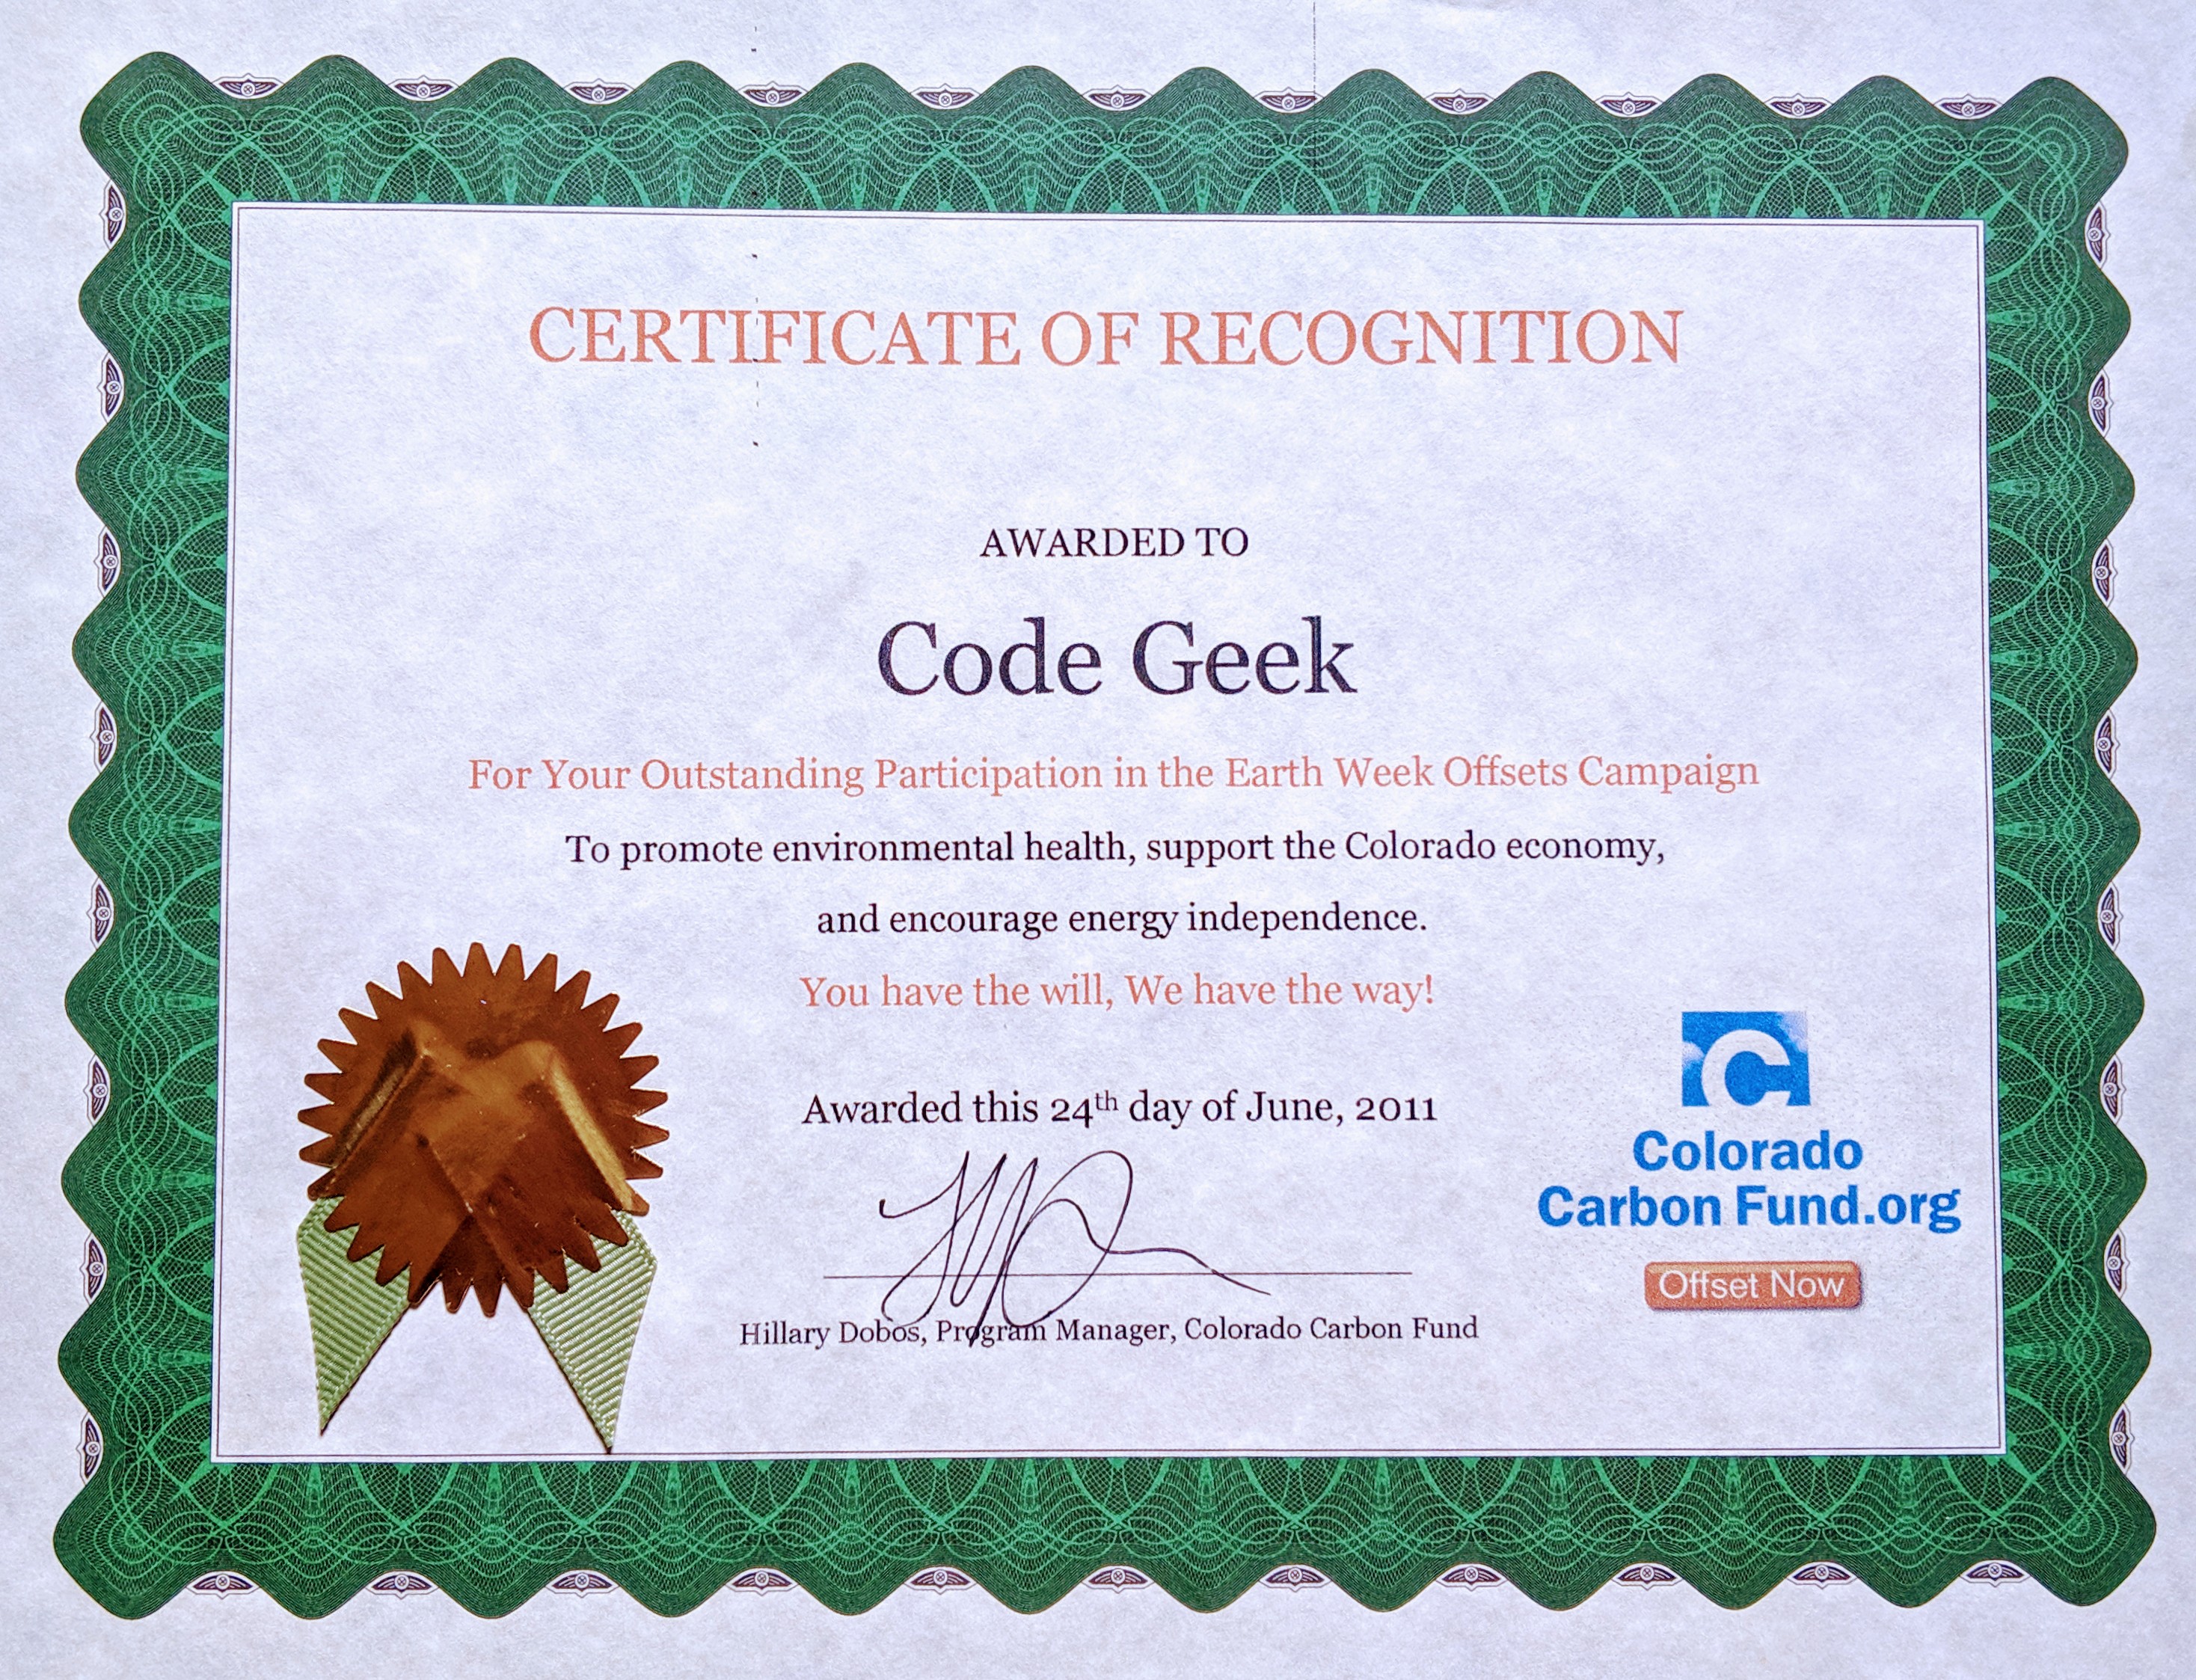 Certificate of Recognition award by Colorado Carbon Fund